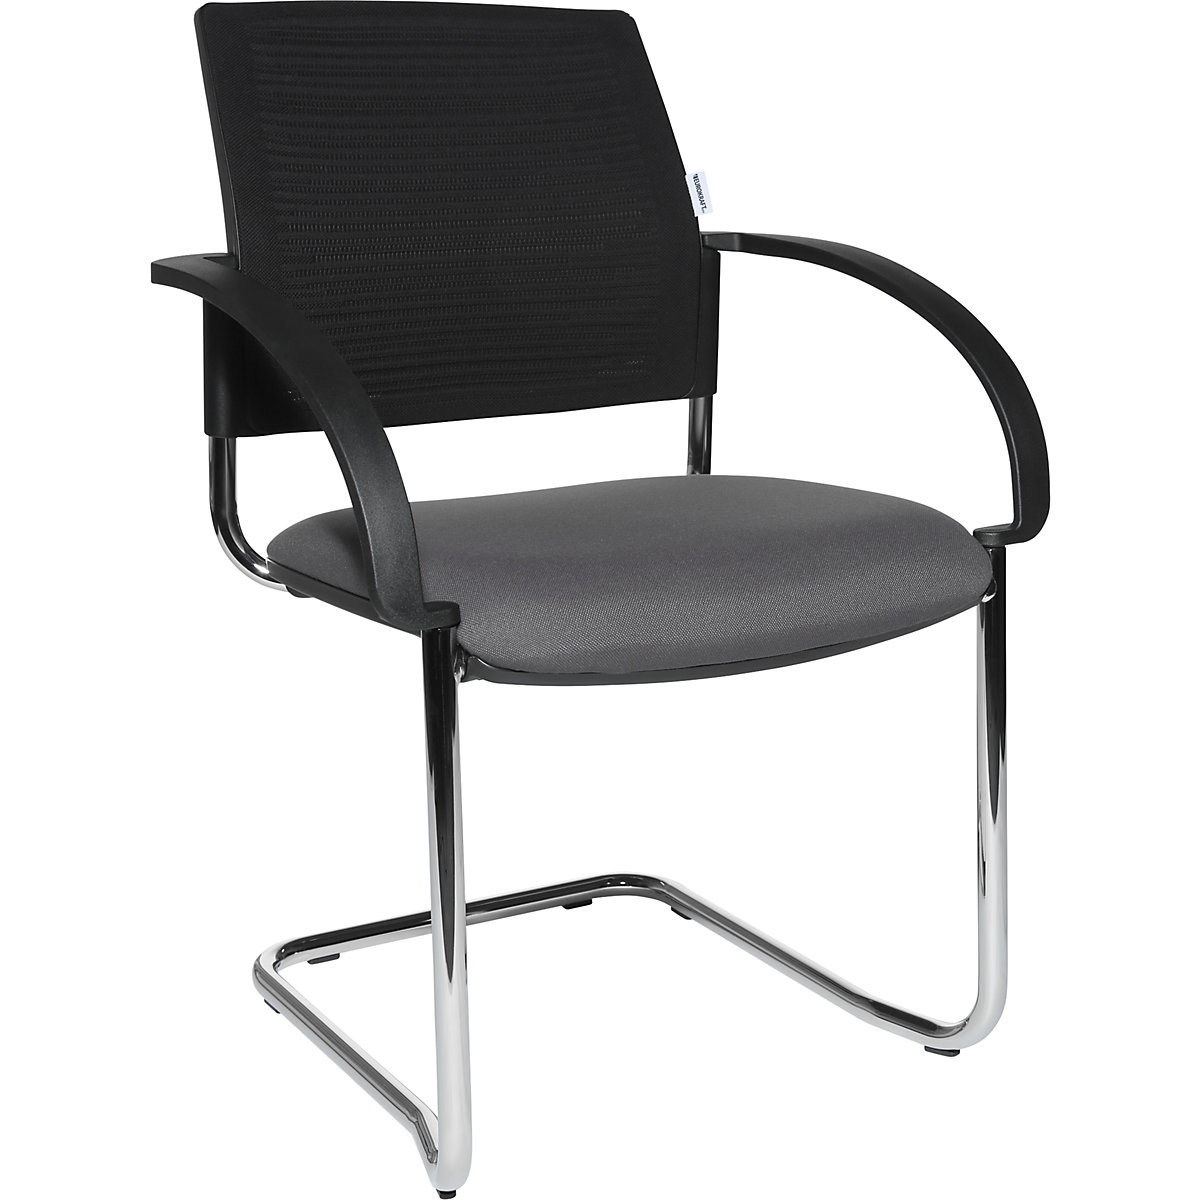 Cantilever chairs, pack of 2 – eurokraft pro, mesh covered back rest, black, charcoal seat-7